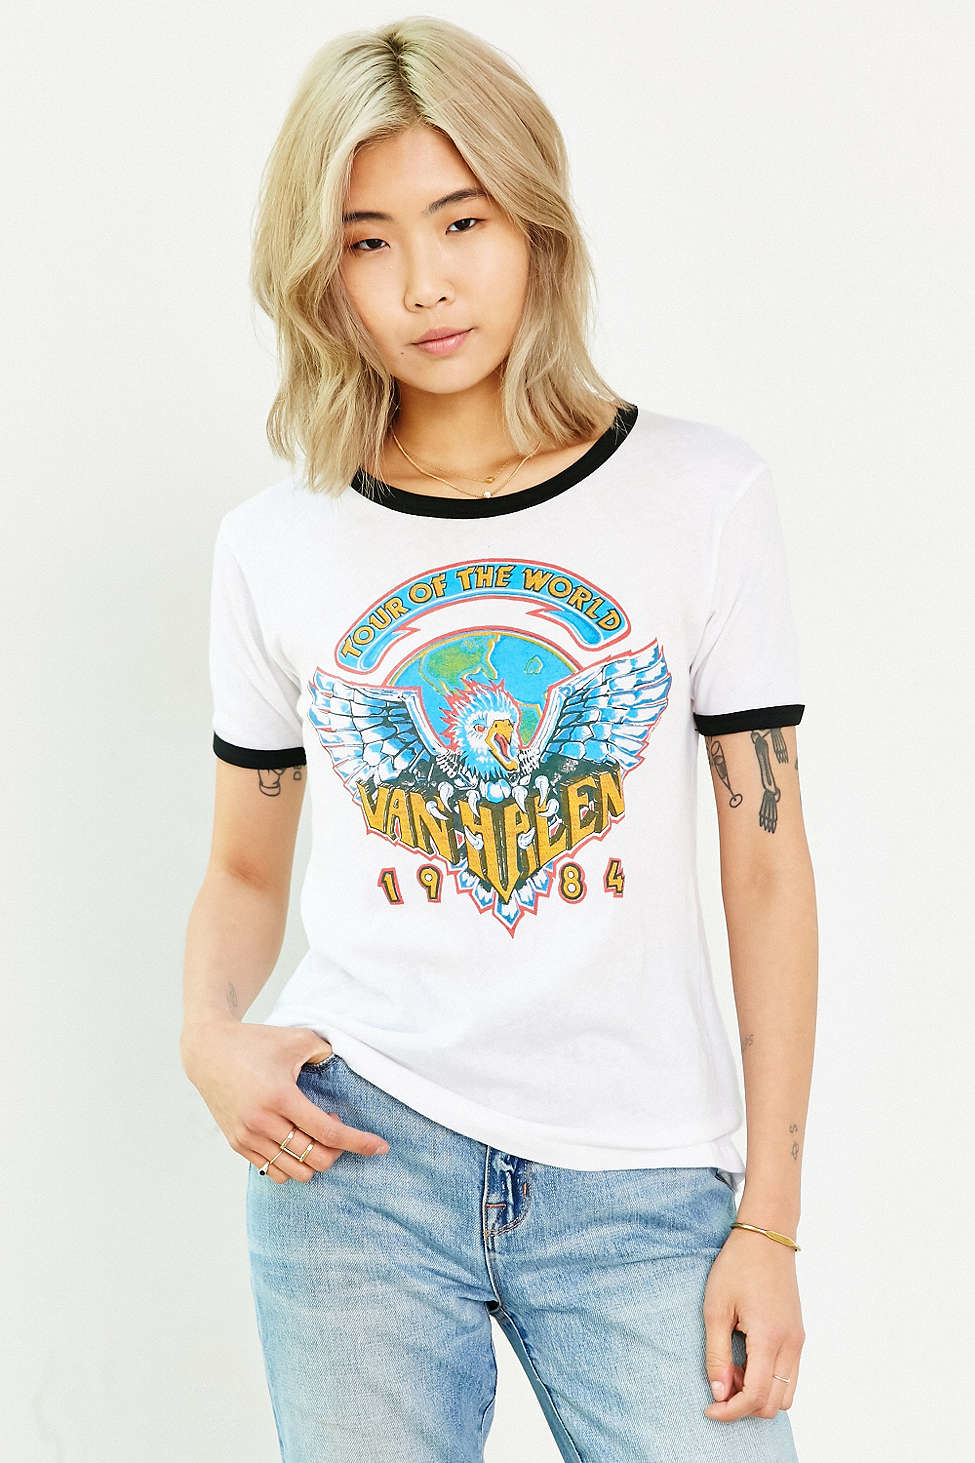 Near rock band tees urban outfitters clothing line wiki jackson